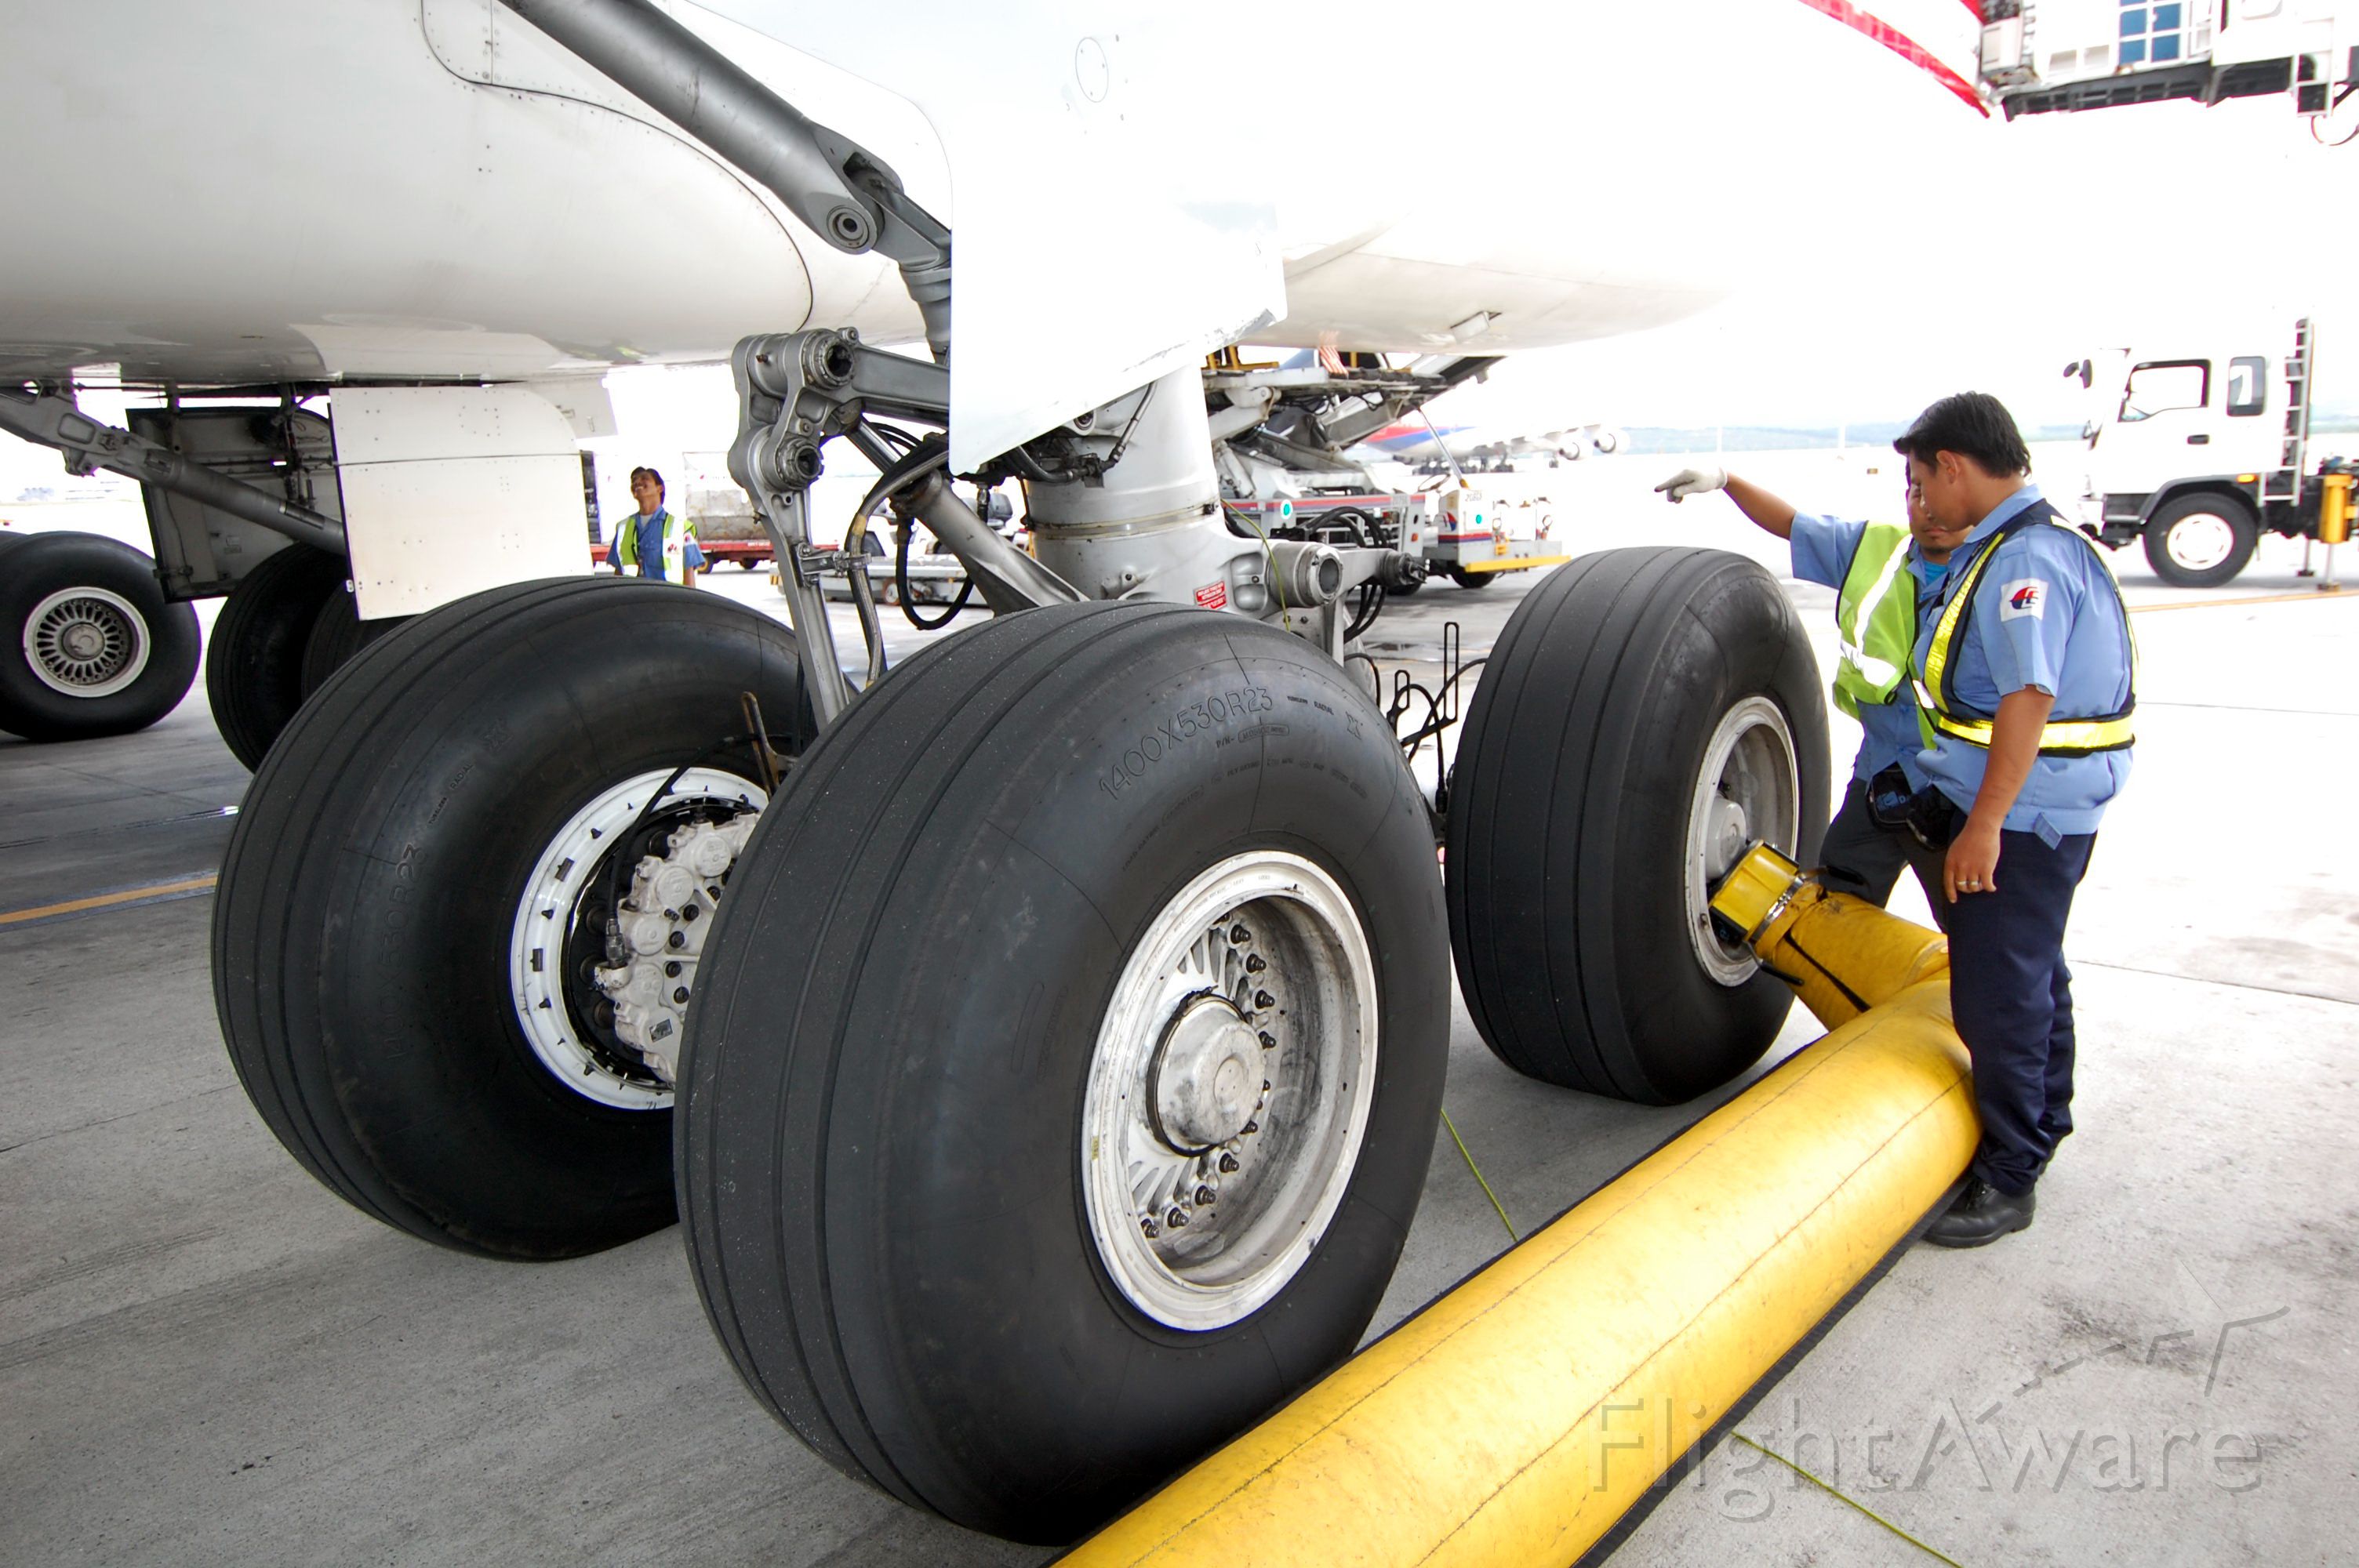 Airbus A340-300 — - Brake cooling on a short stop over